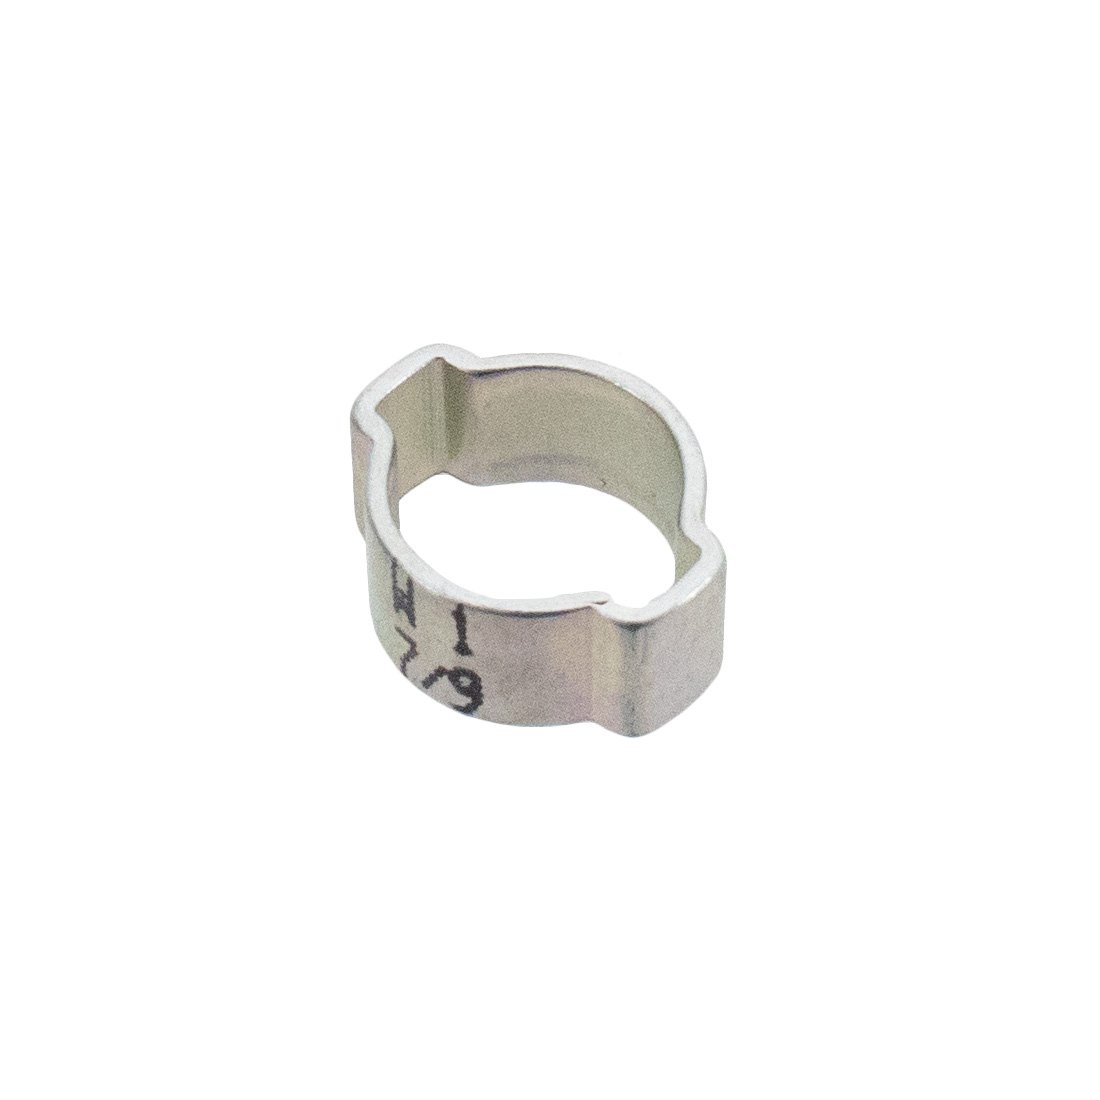 World Enterprises Clamps - Low Profile - Angled Top View